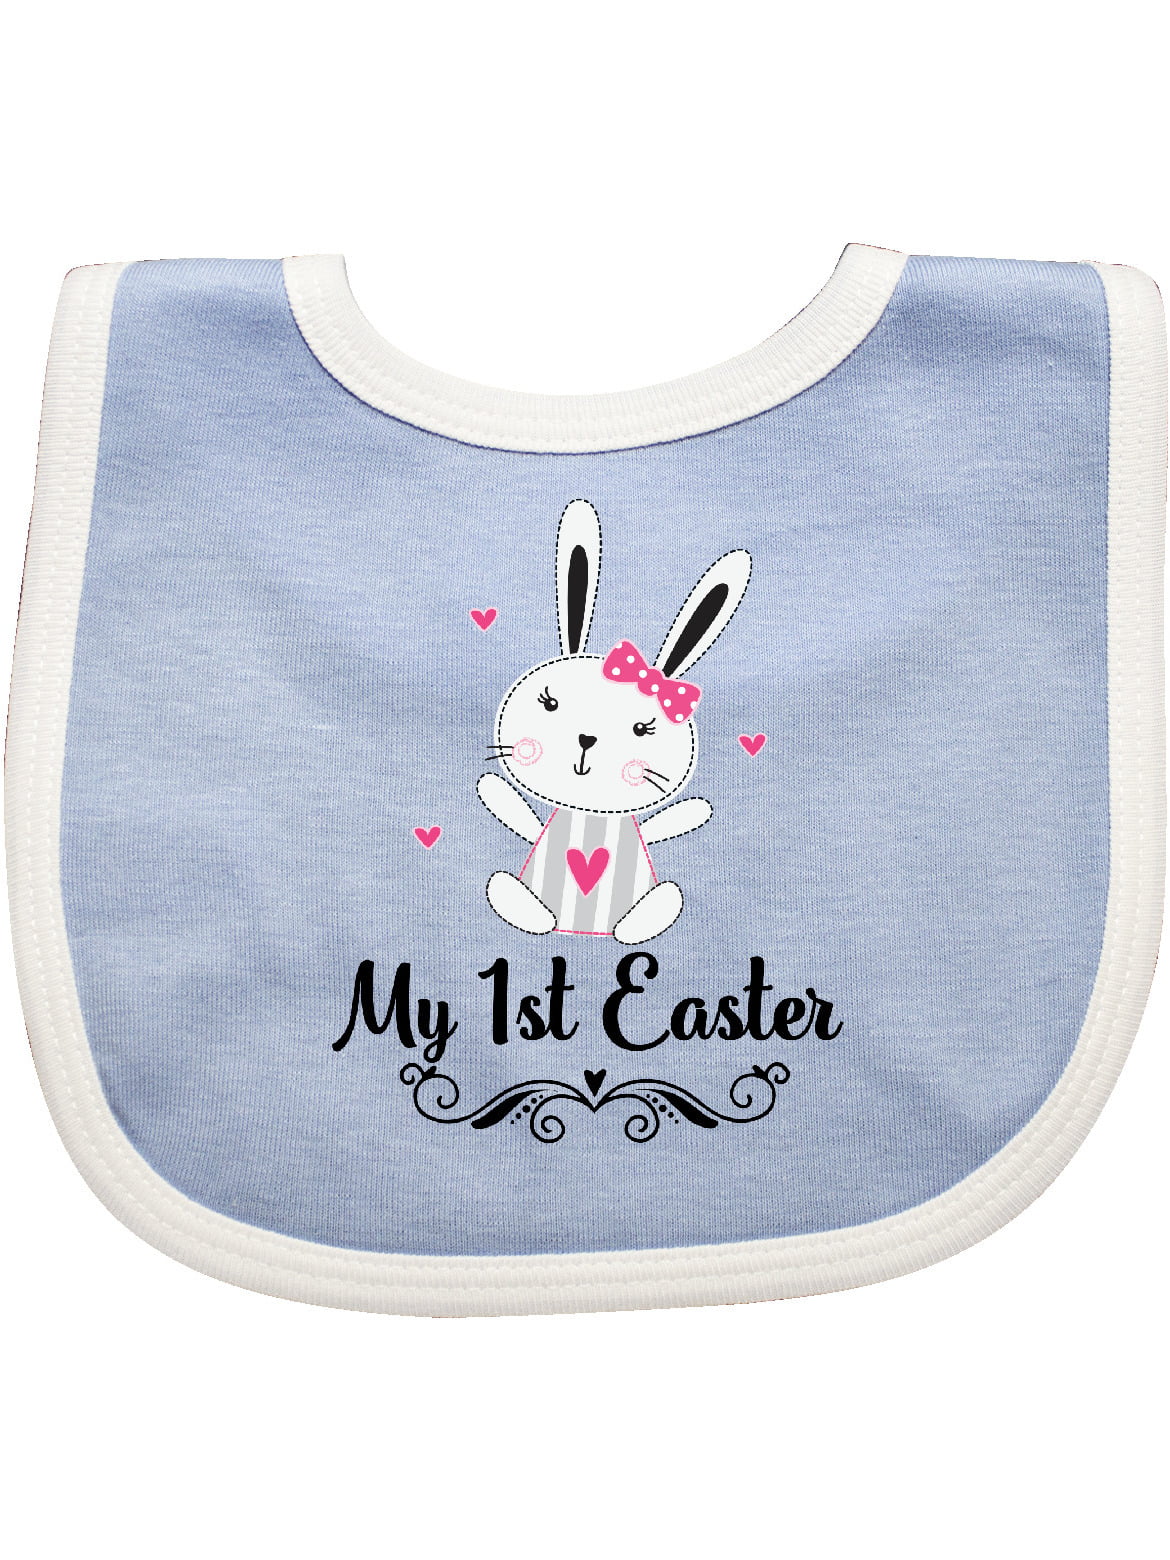 New Unisex Baby Carters My First Easter Bib Bunny Chick Blue White Boy 